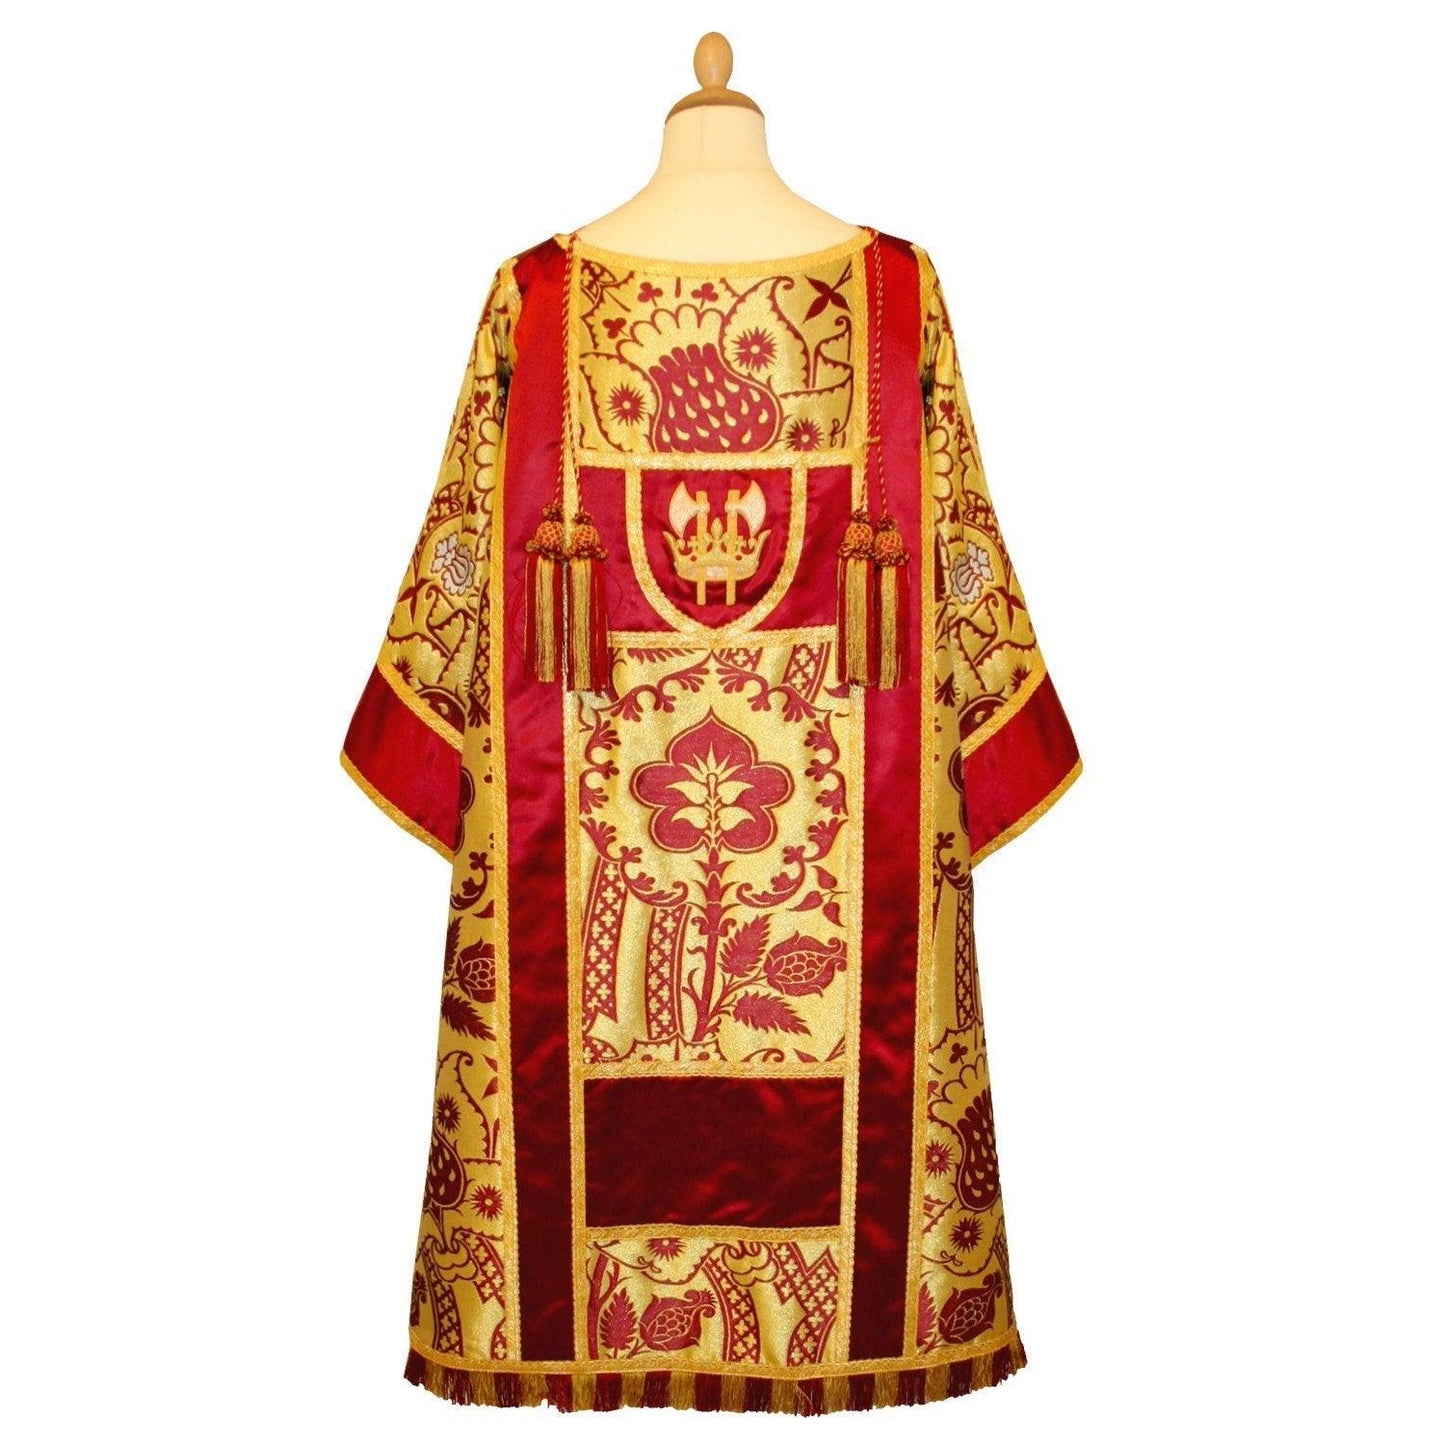 Embroidered Gothic Dalmatic in Red/White/Gold Comper Strawberry with Red Satin Orphreys - Watts & Co. (international)